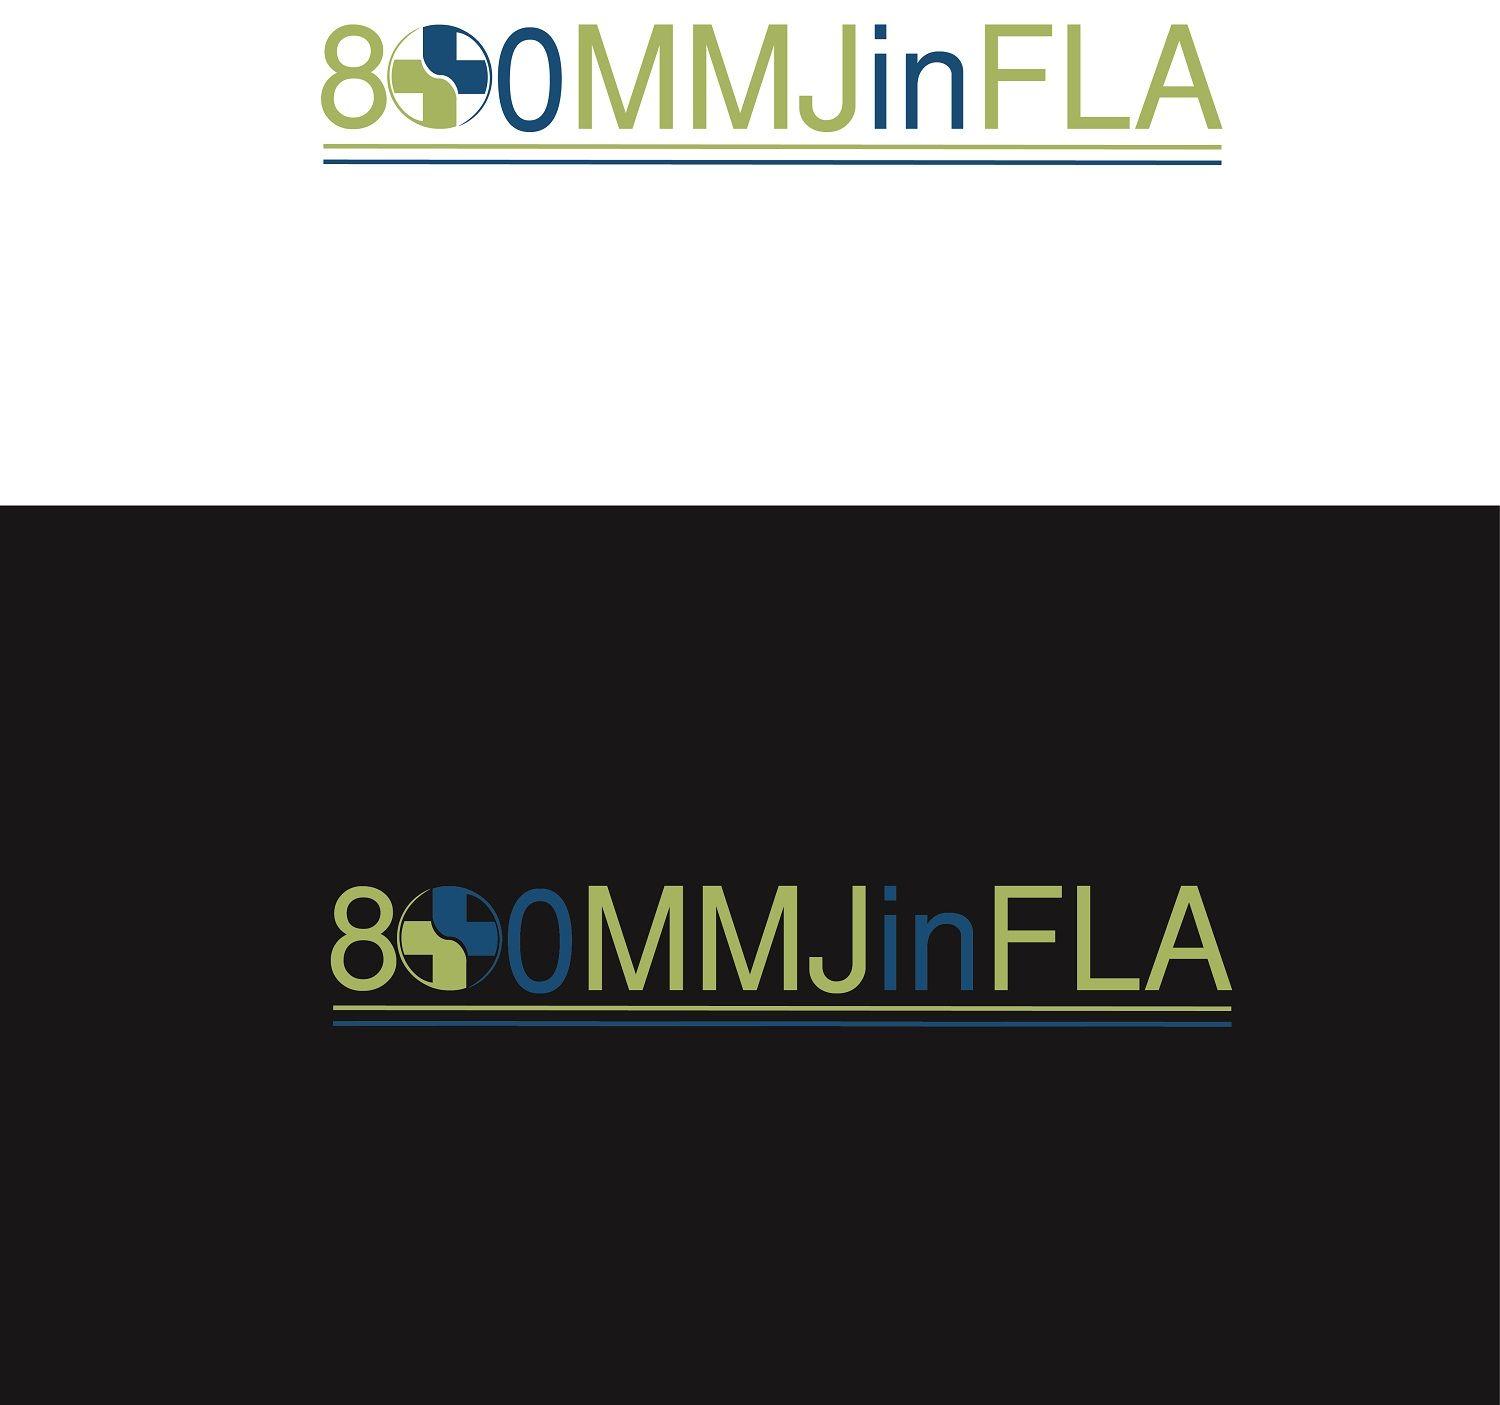 Generic Medical Logo - Professional, Serious, Medical Logo Design for 800MMJinFLA by AB ...